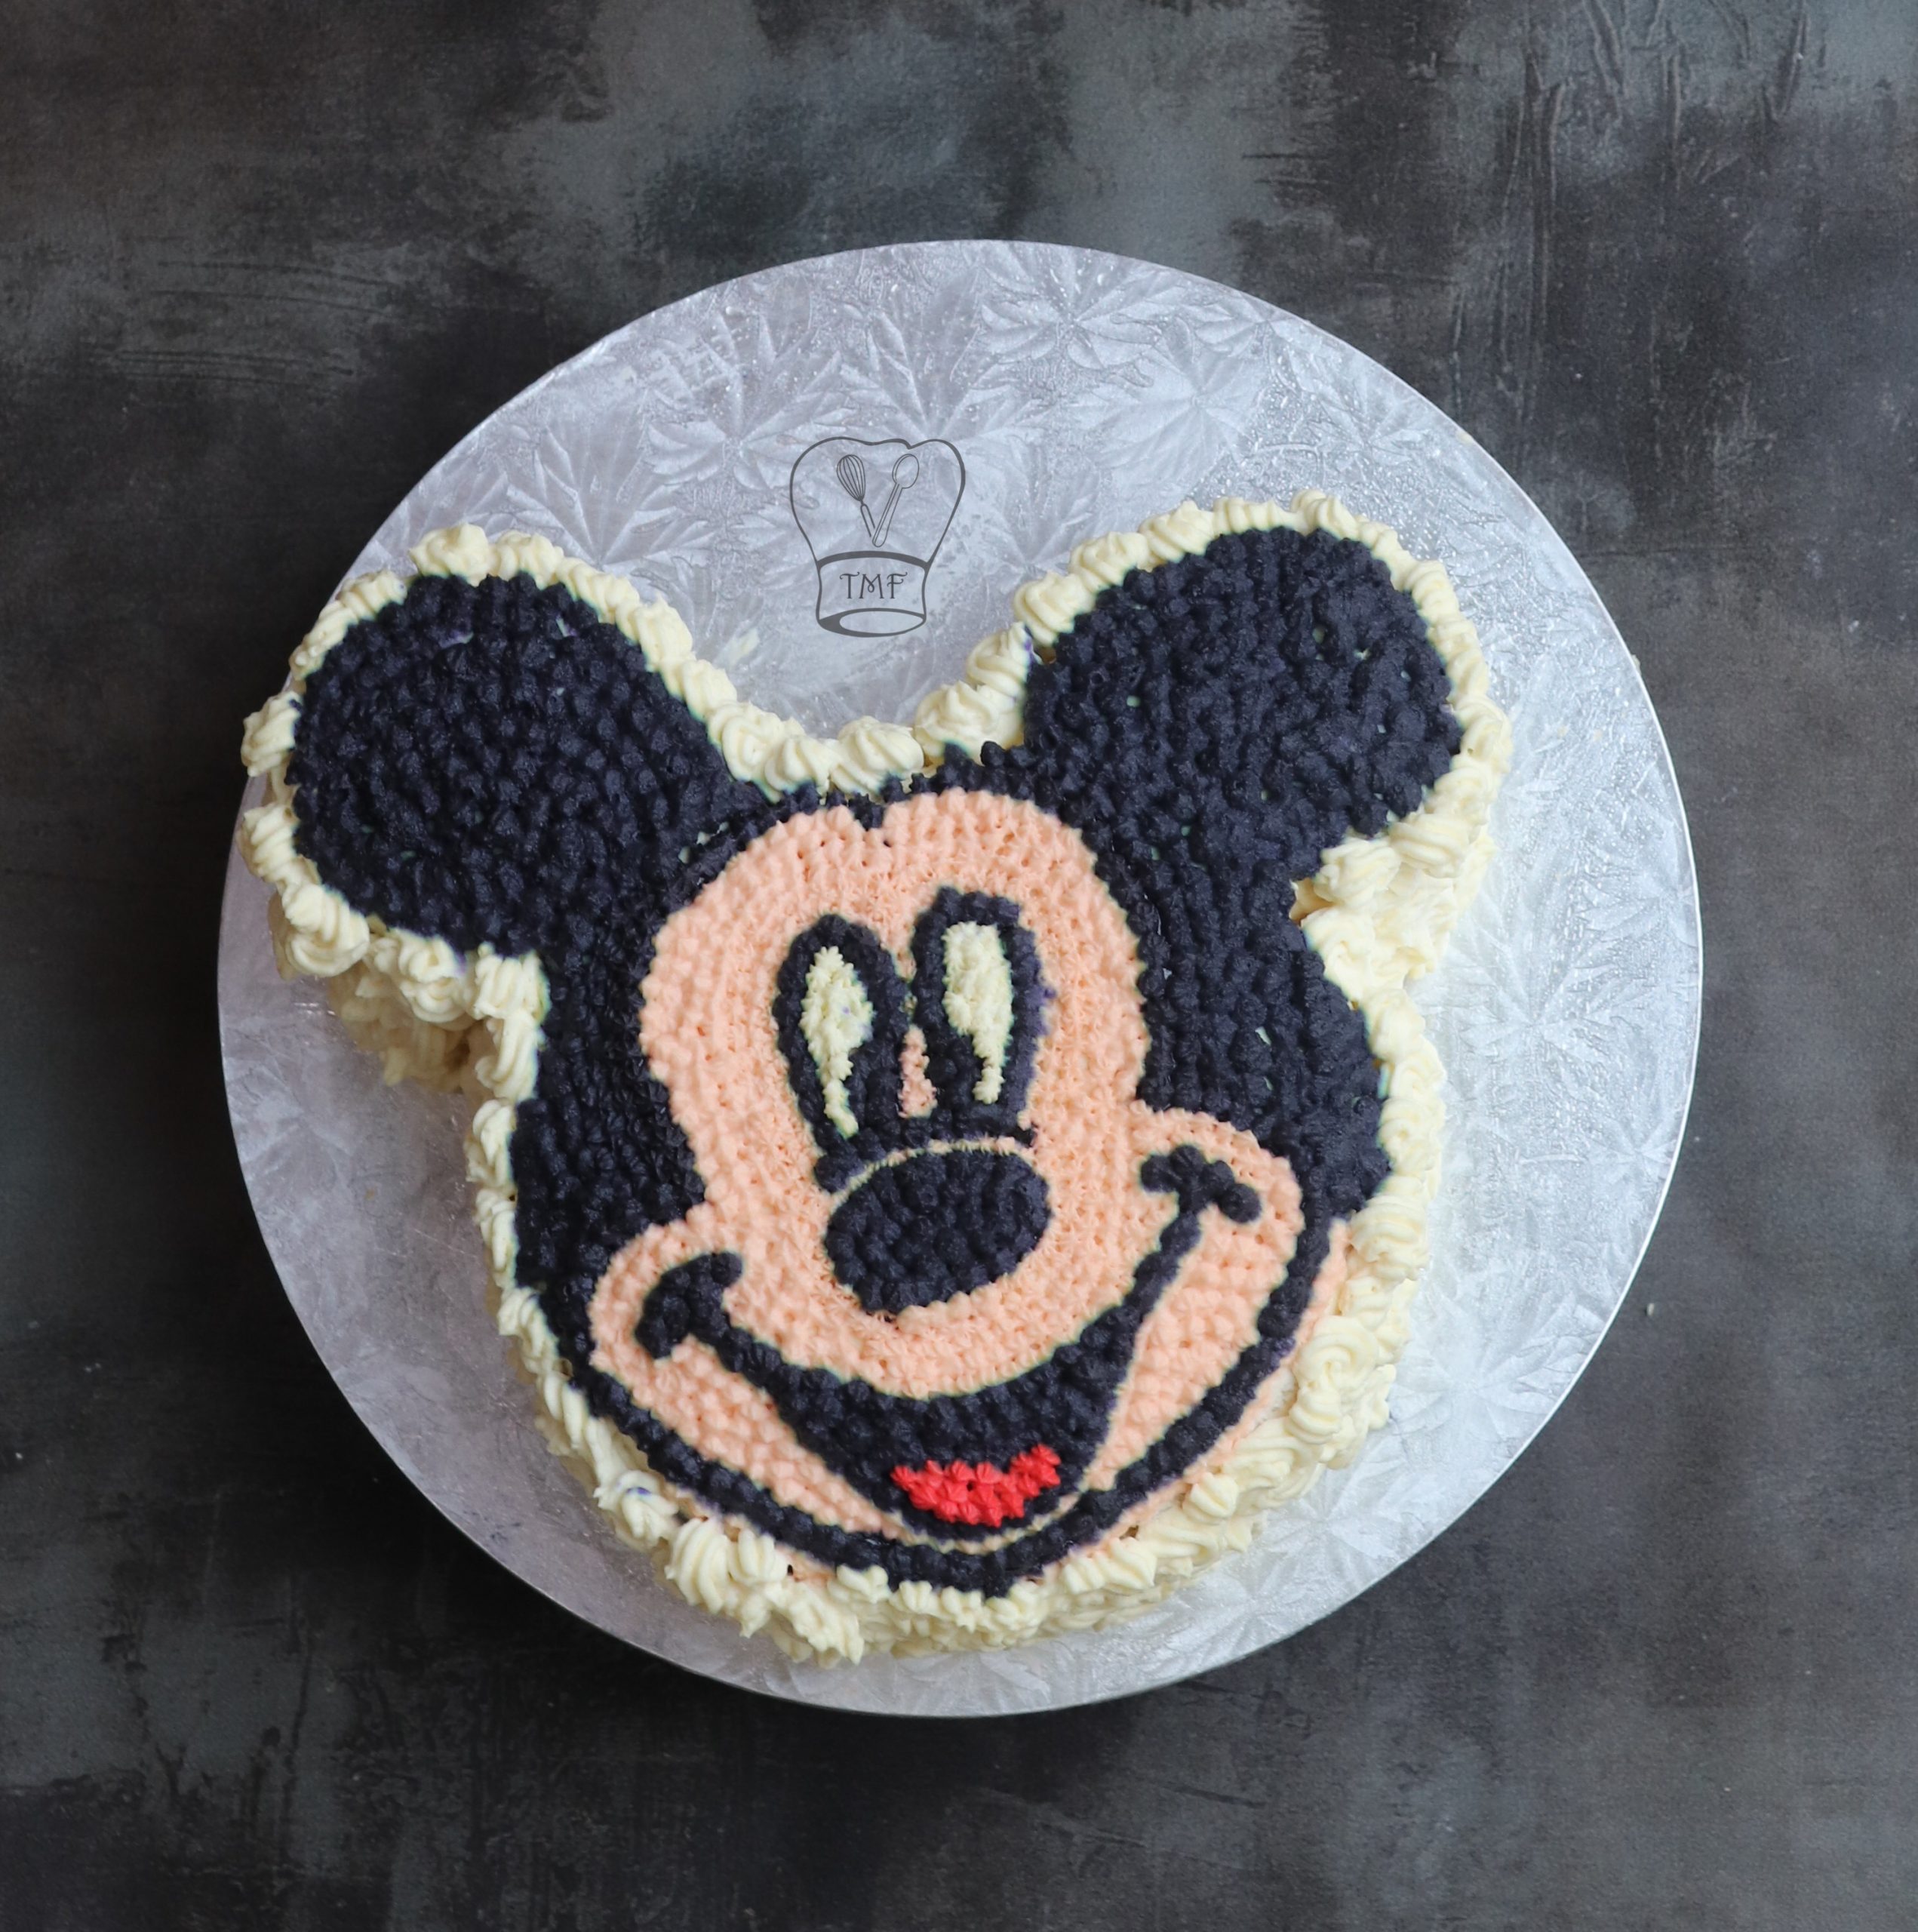 How to Bake and Decorate with a Character Cake Pan